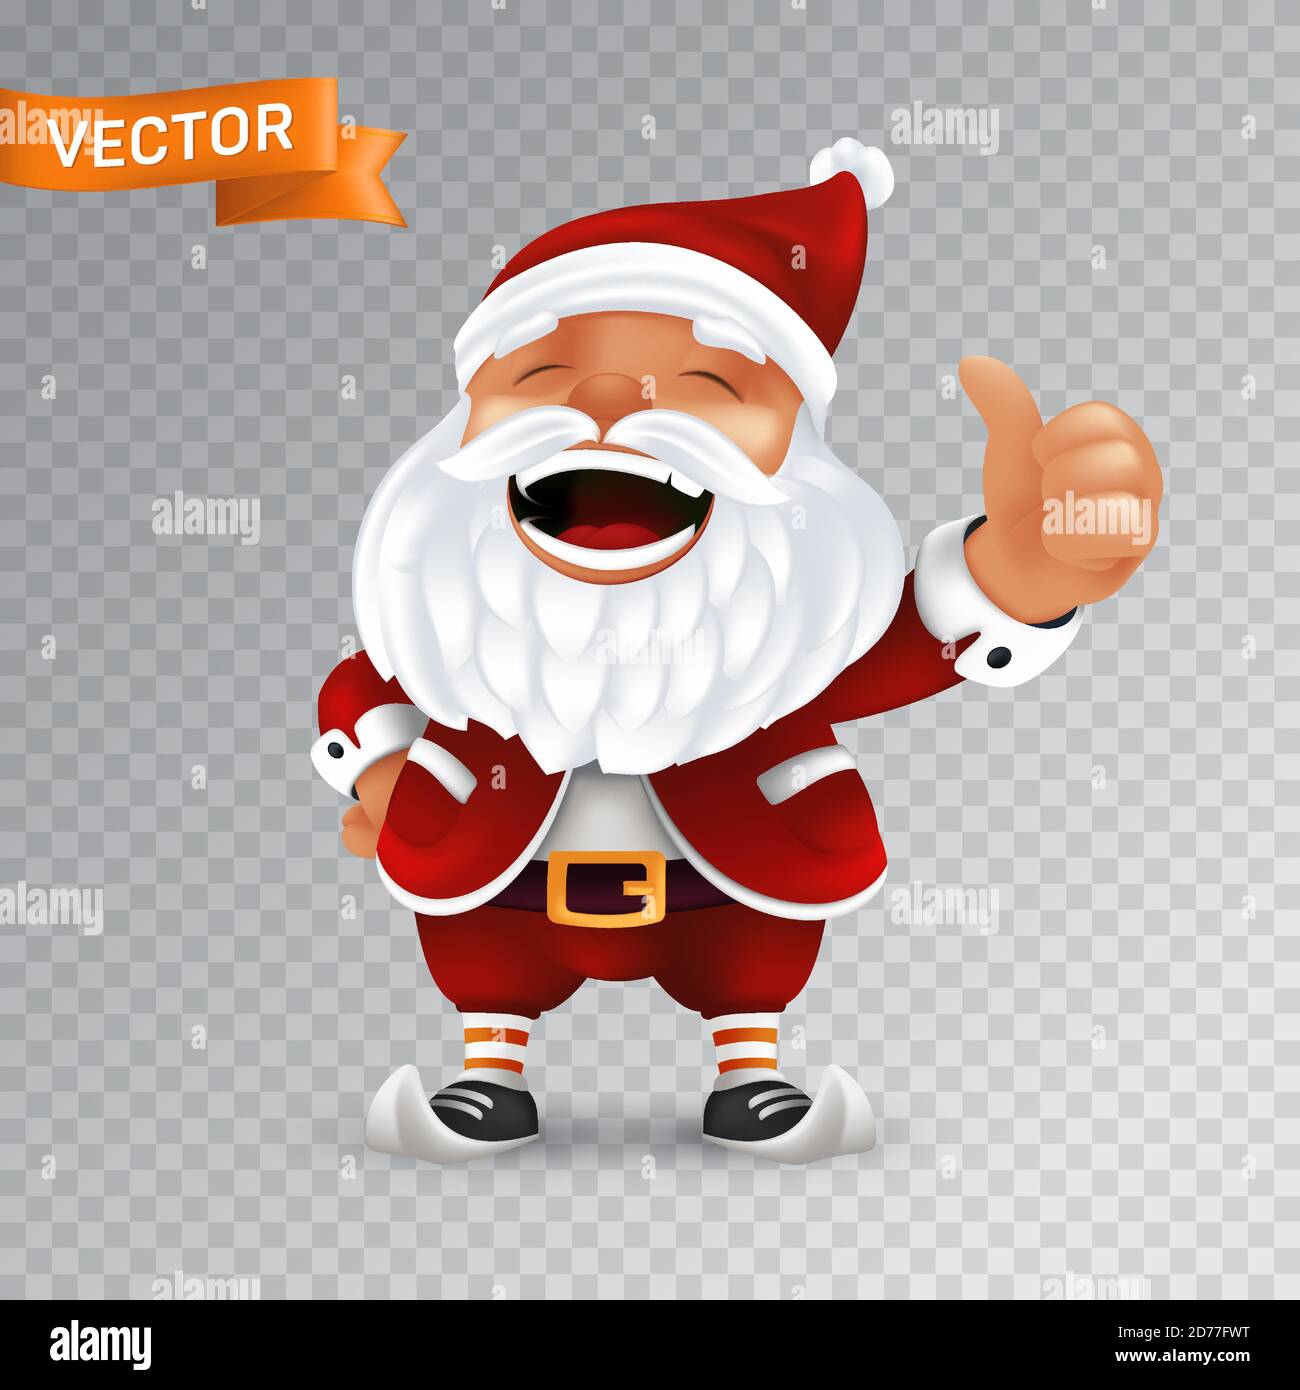 Funny cartoon little Santa Claus mascot without eyeglasses in a red hat with thumbs up. Vector illustration of laughing character with white beard iso Stock Vector